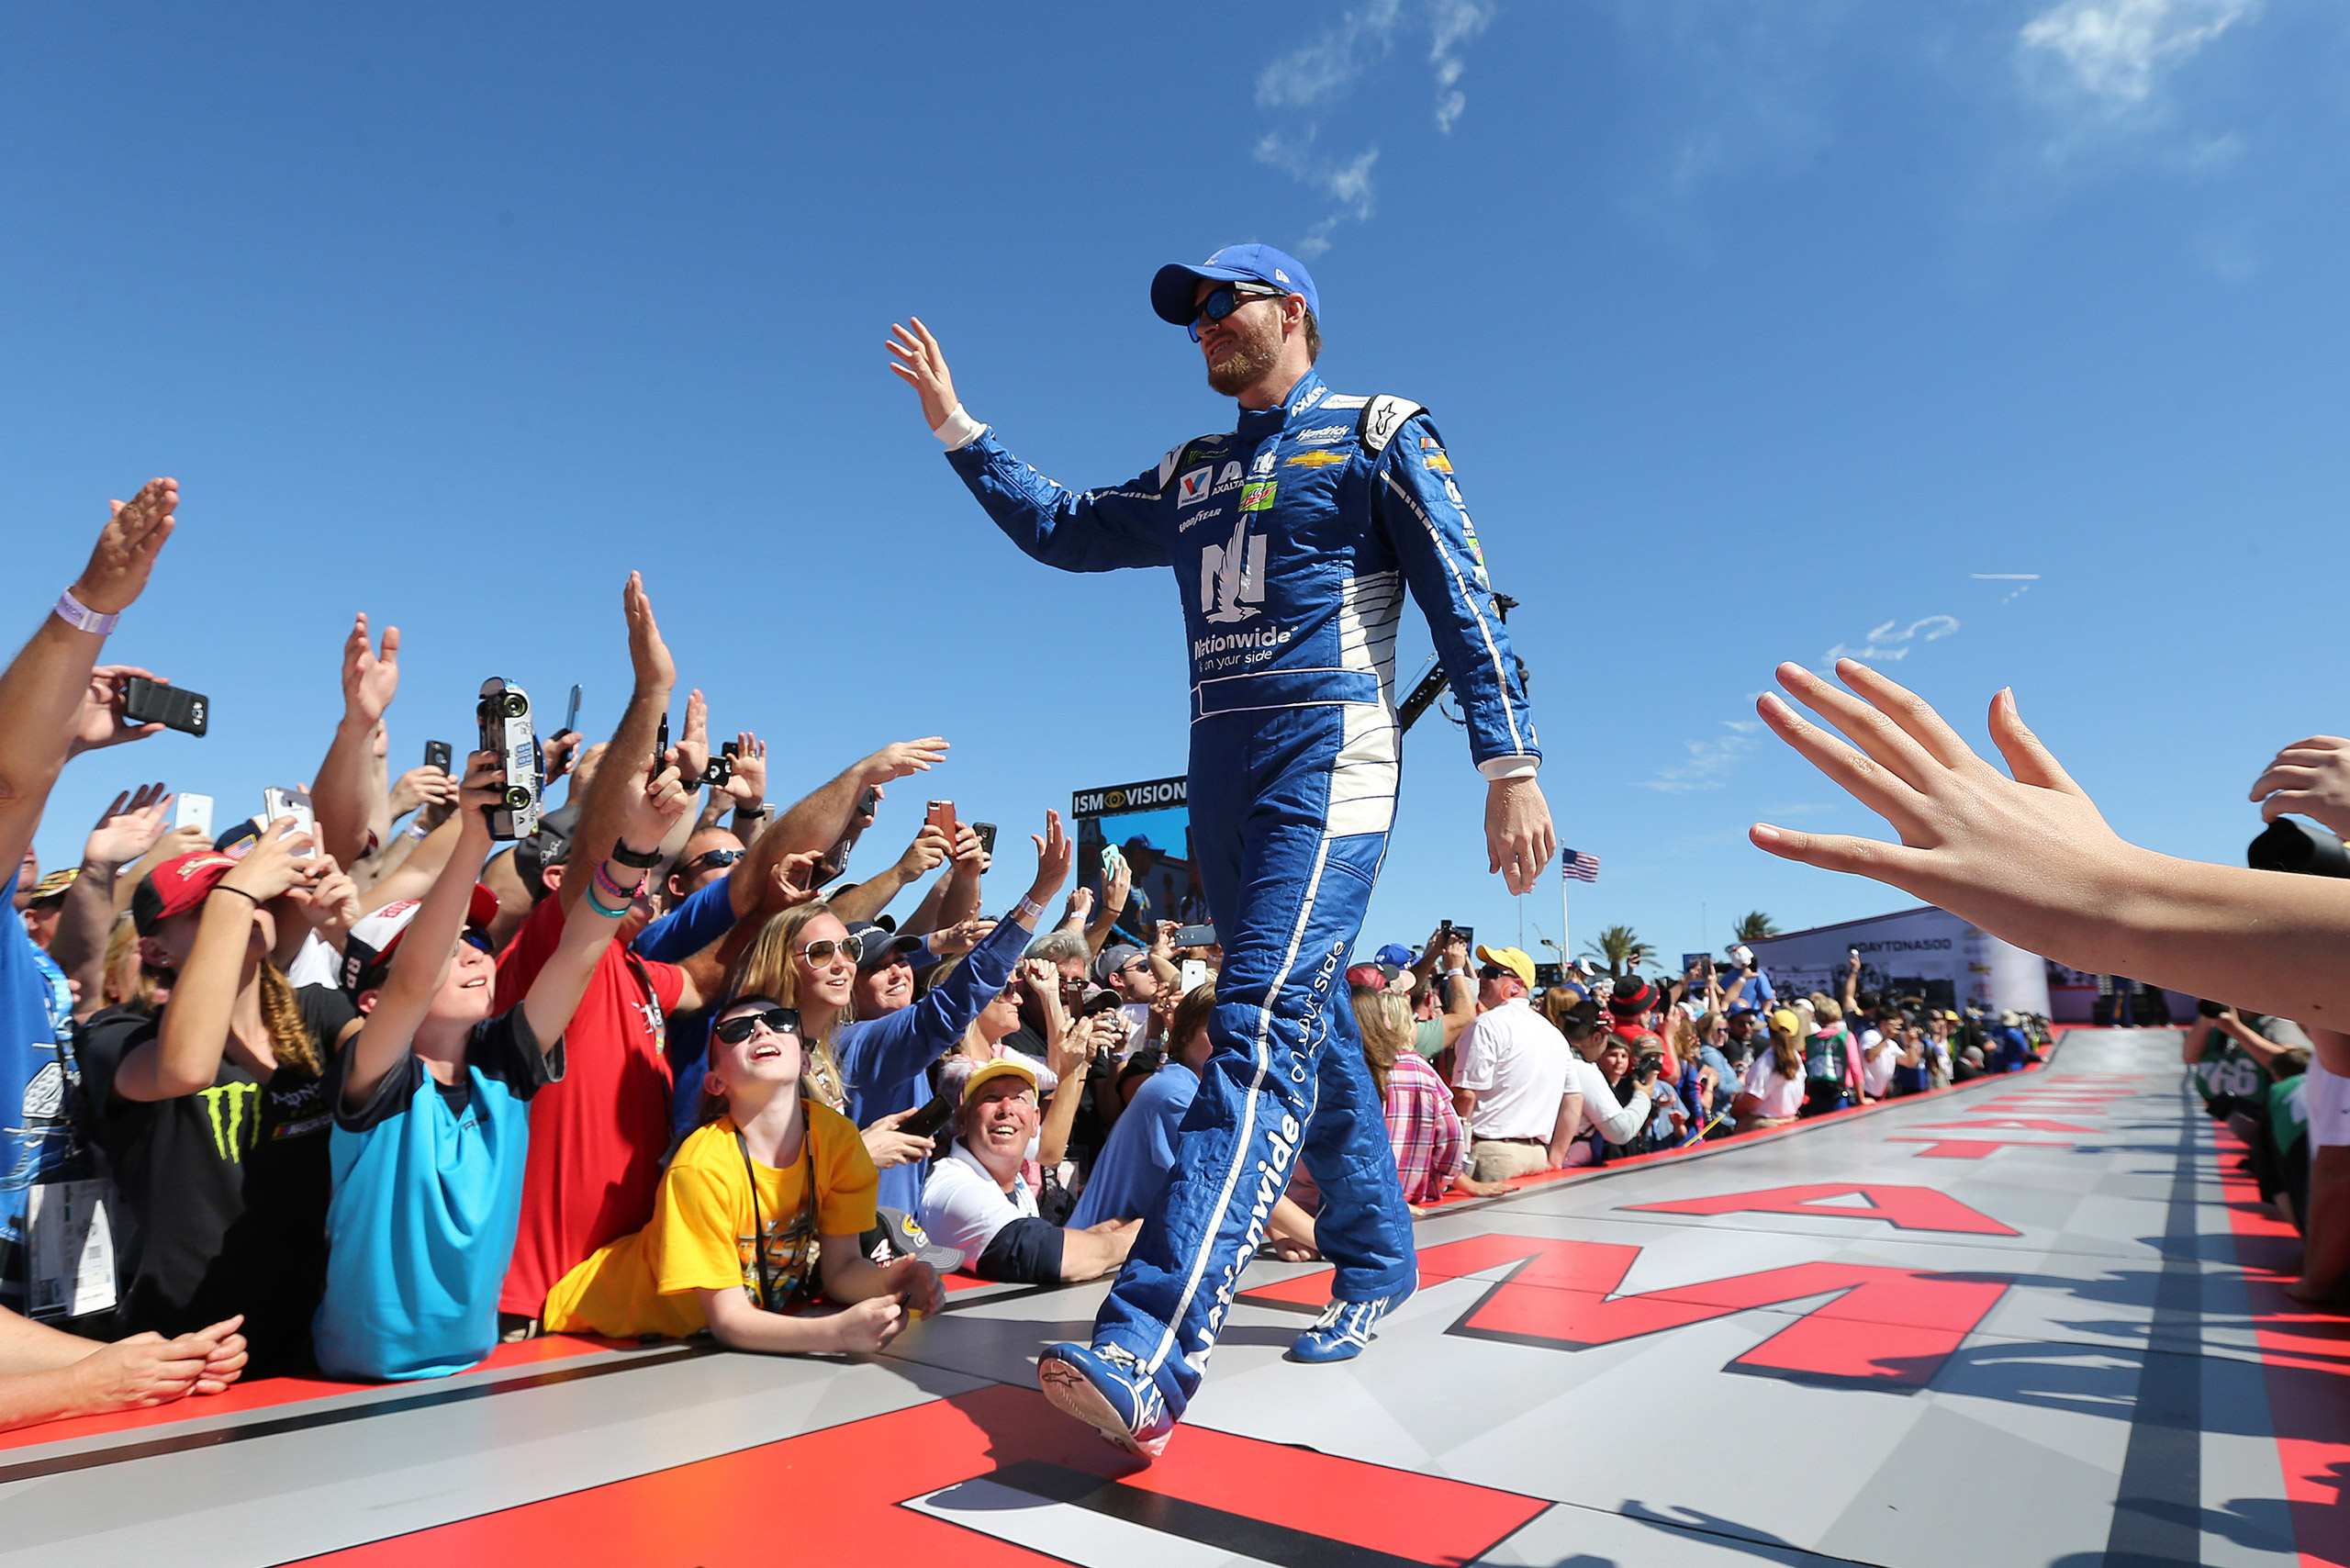 NASCAR driver Dale Earnhardt Jr. waves to the crowd during driver introductions prior to the start of the 59th Annual NASCAR Daytona 500 auto race at Daytona International Speedway on February 26, 2017 in Daytona Beach, Florida. (Alex Menendez&mdash;AP)